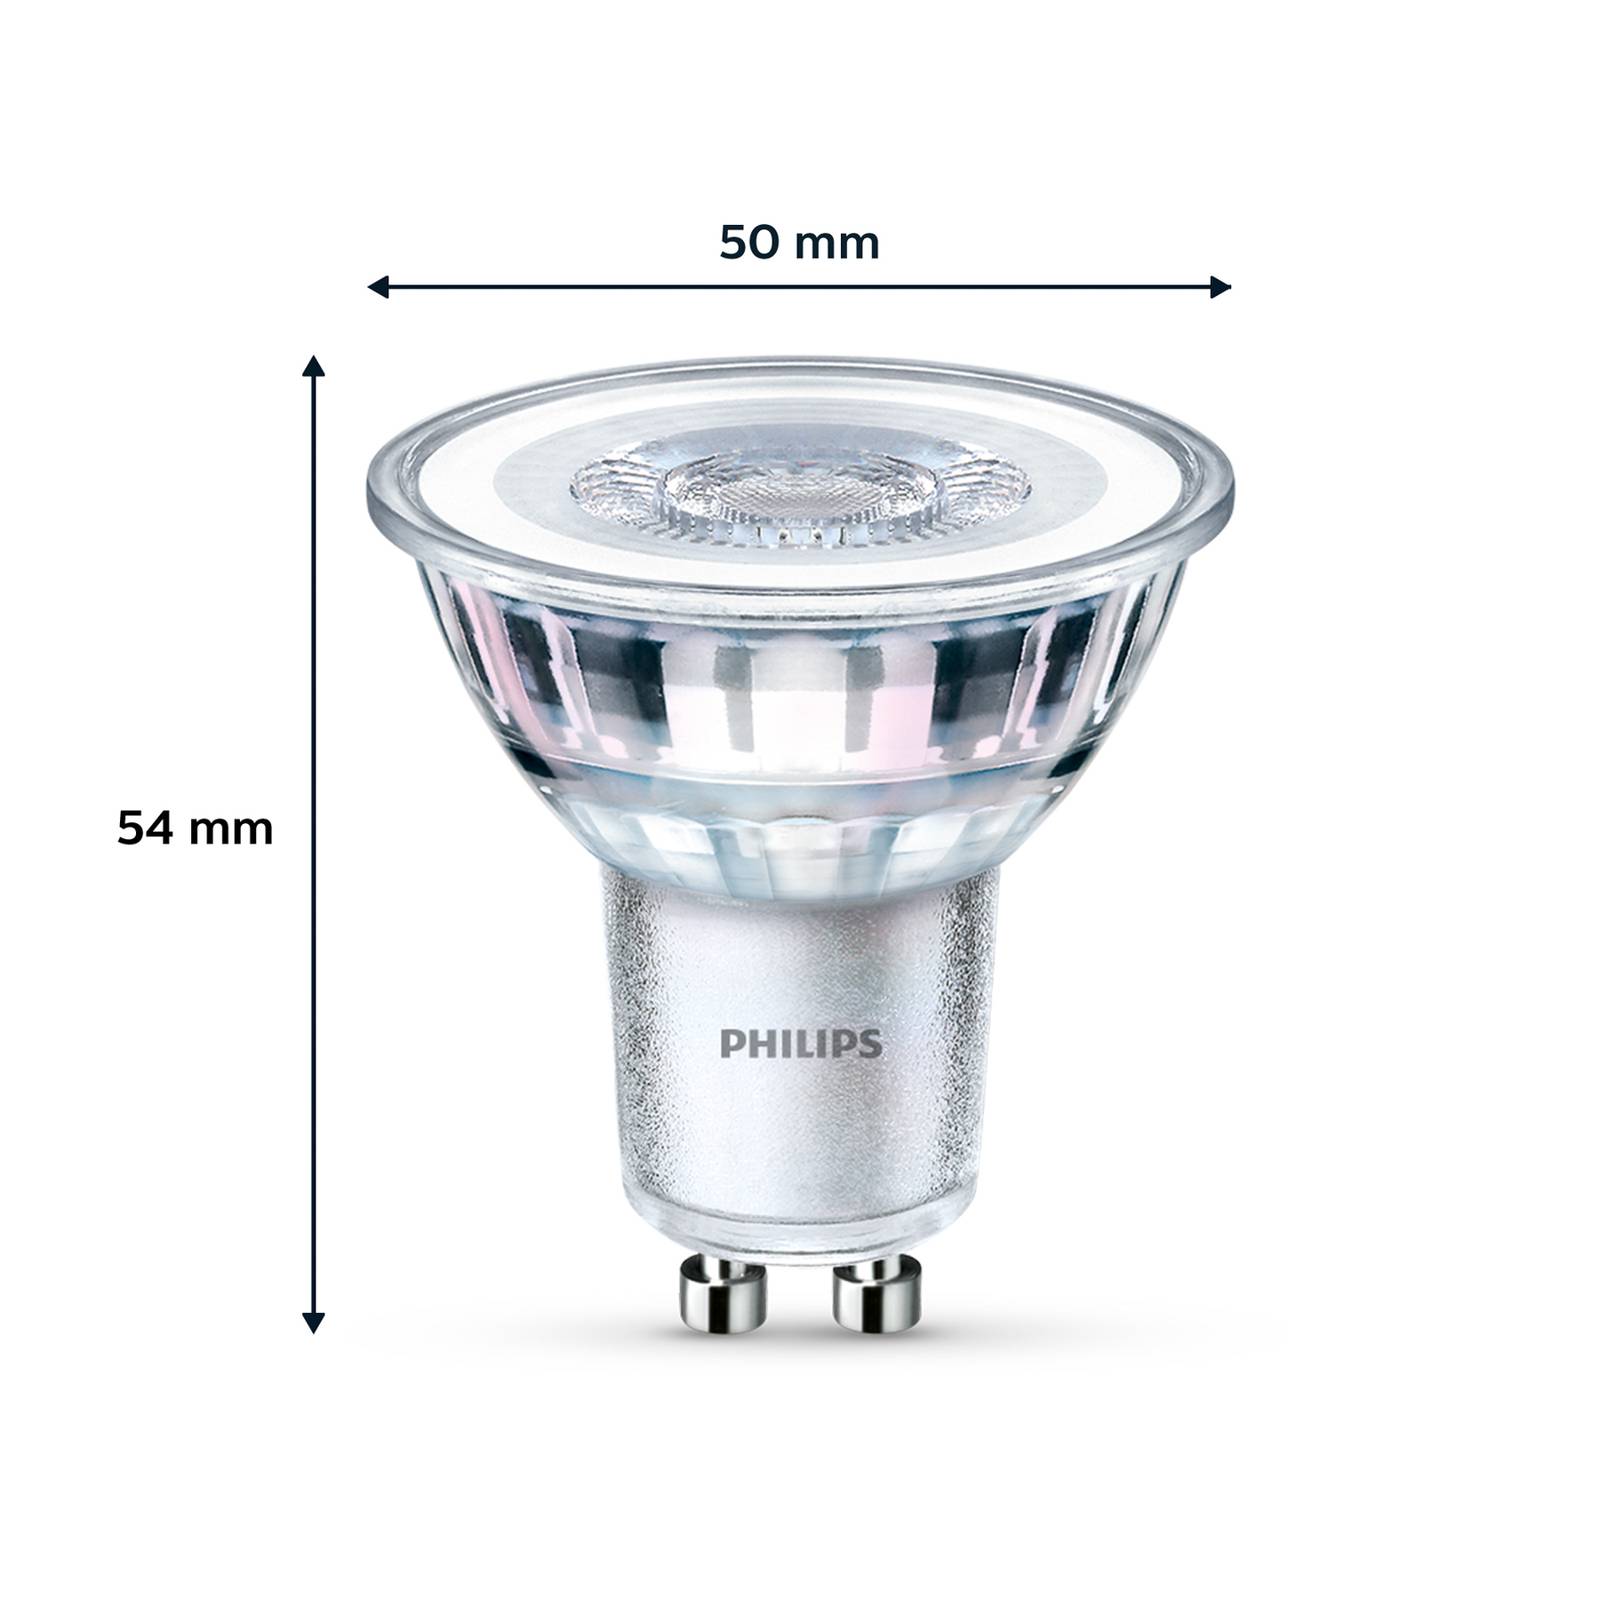 Philips LED GU10 3,5 W 255lm 827 claire 36° x6